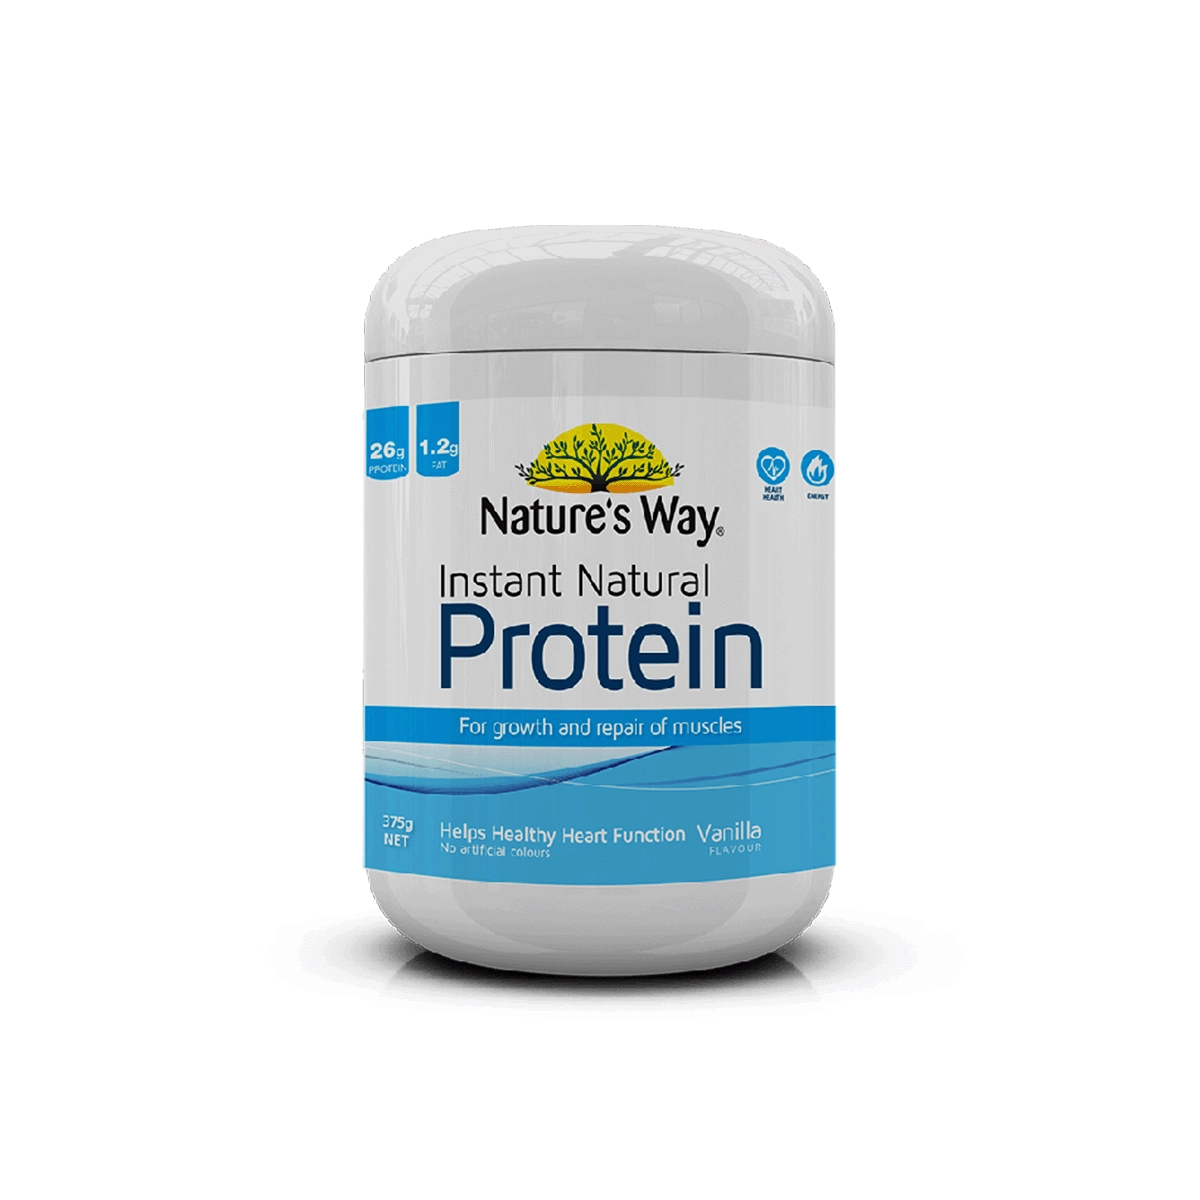 Nature's Way Instant Natural Protein Vanilla 375g